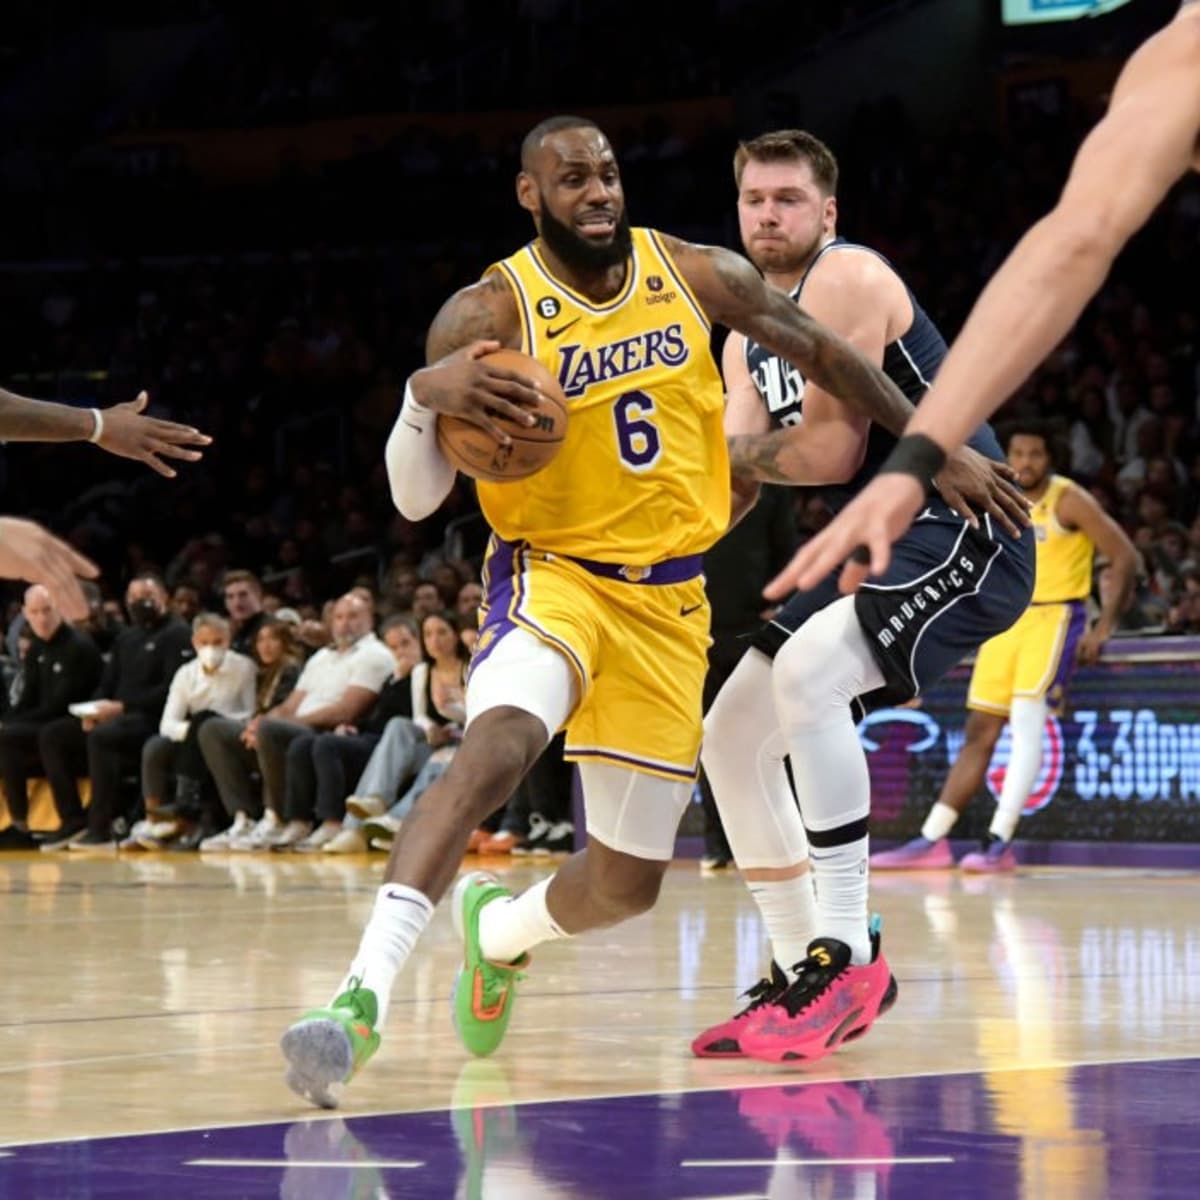 Finding LeBron a Second Star: Should LA Be Looking Internally or